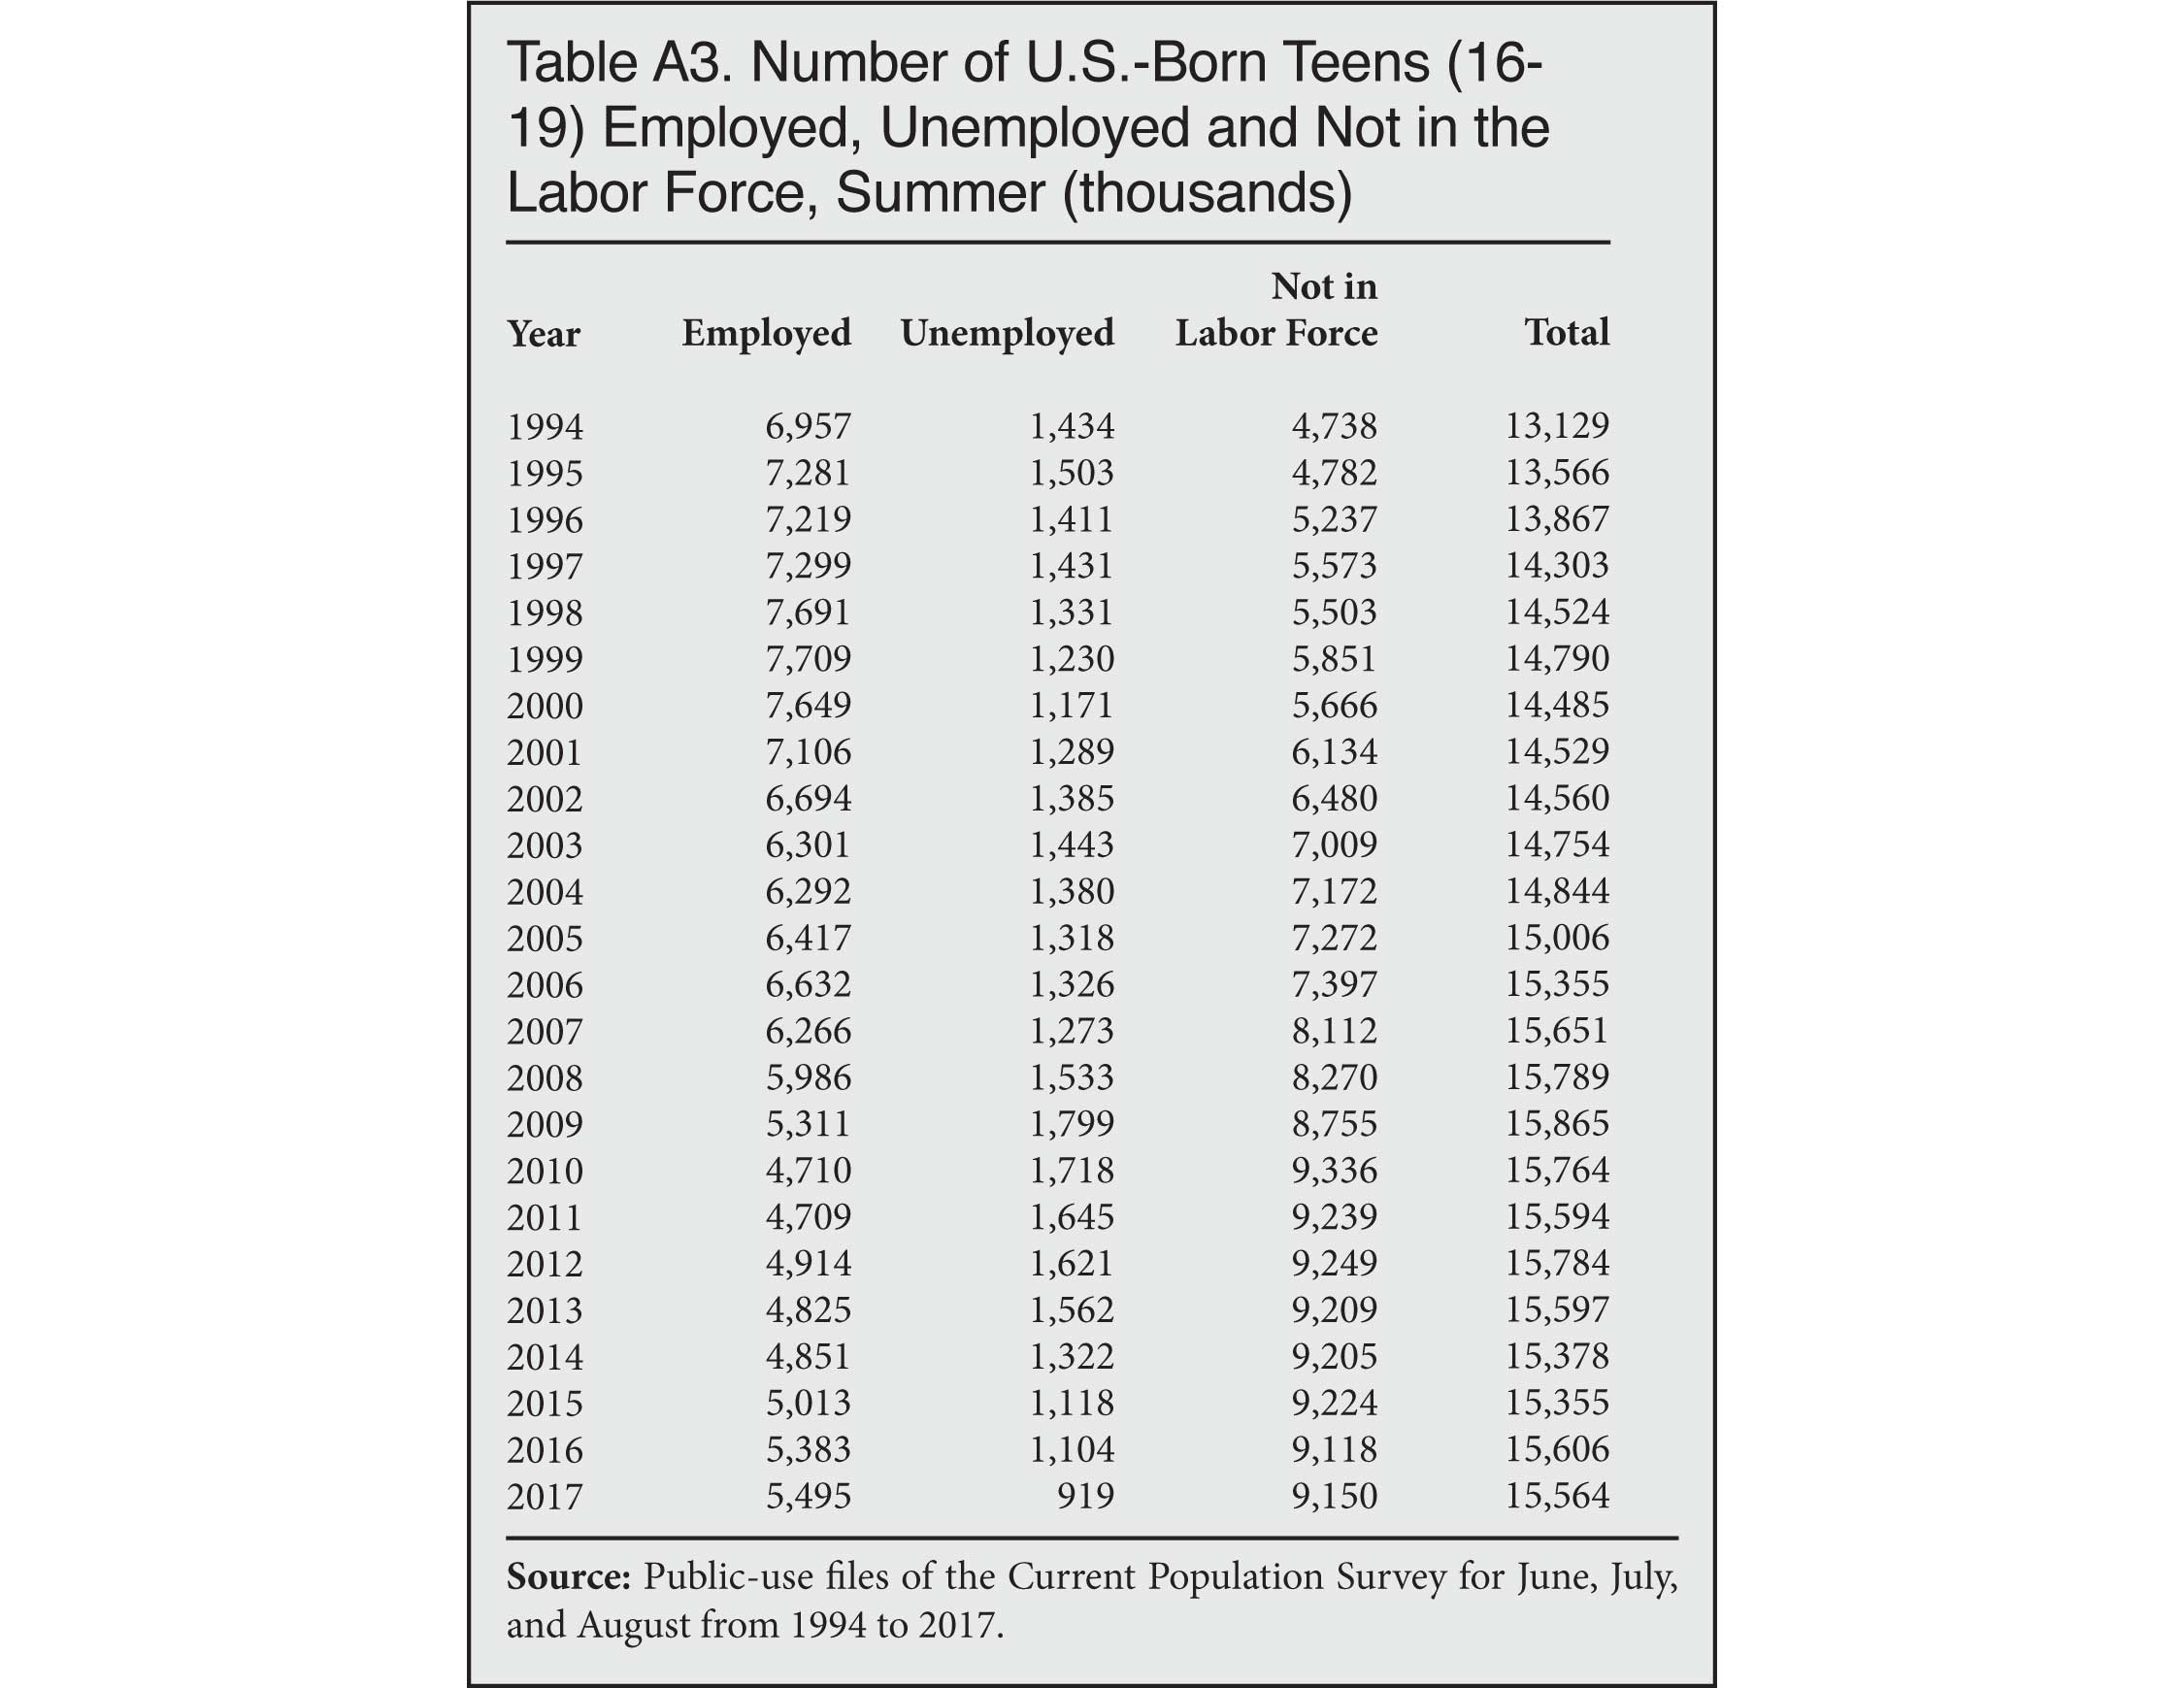 Table: Number of US Born Teens (16-19) Employed, Unemployed and Not in the Labor Force, Summer